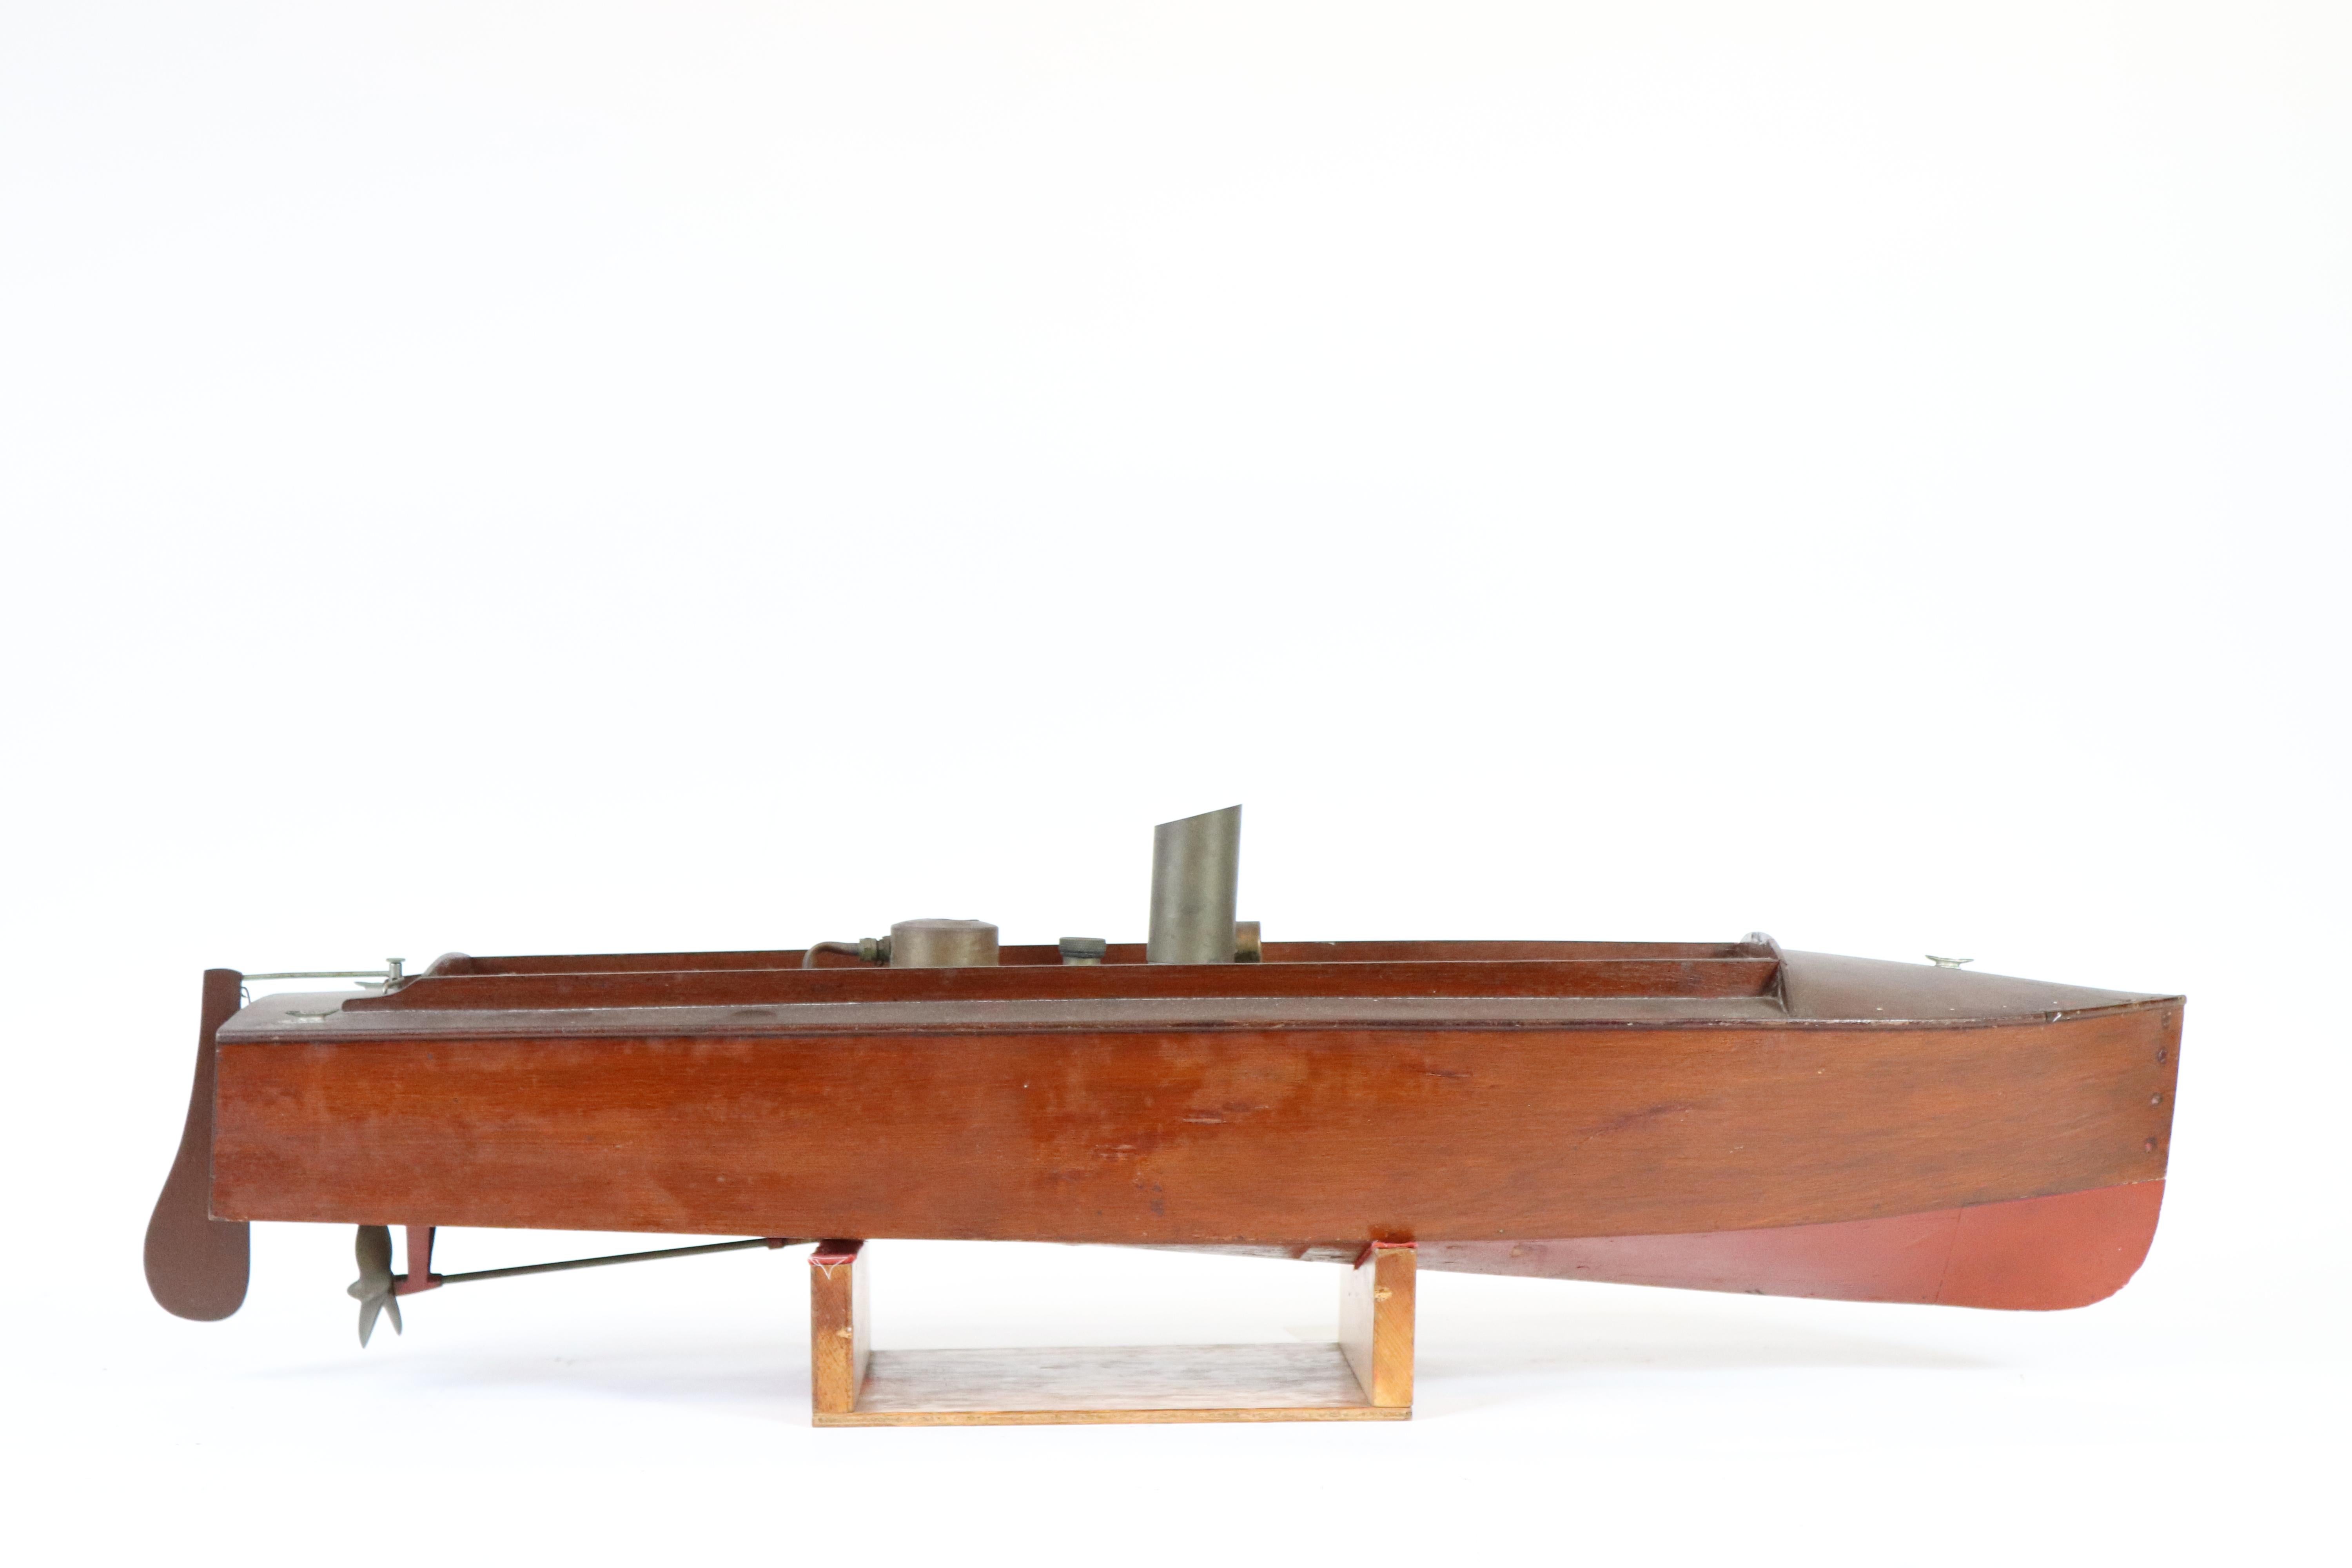 Fine, early steam launch model with maker's plate from H.E. Boucher. The interior has boiler, engine, tank, prop, shaft, etc... In original varnish with red below the waterline. Measures: 37 x 9 x 11.